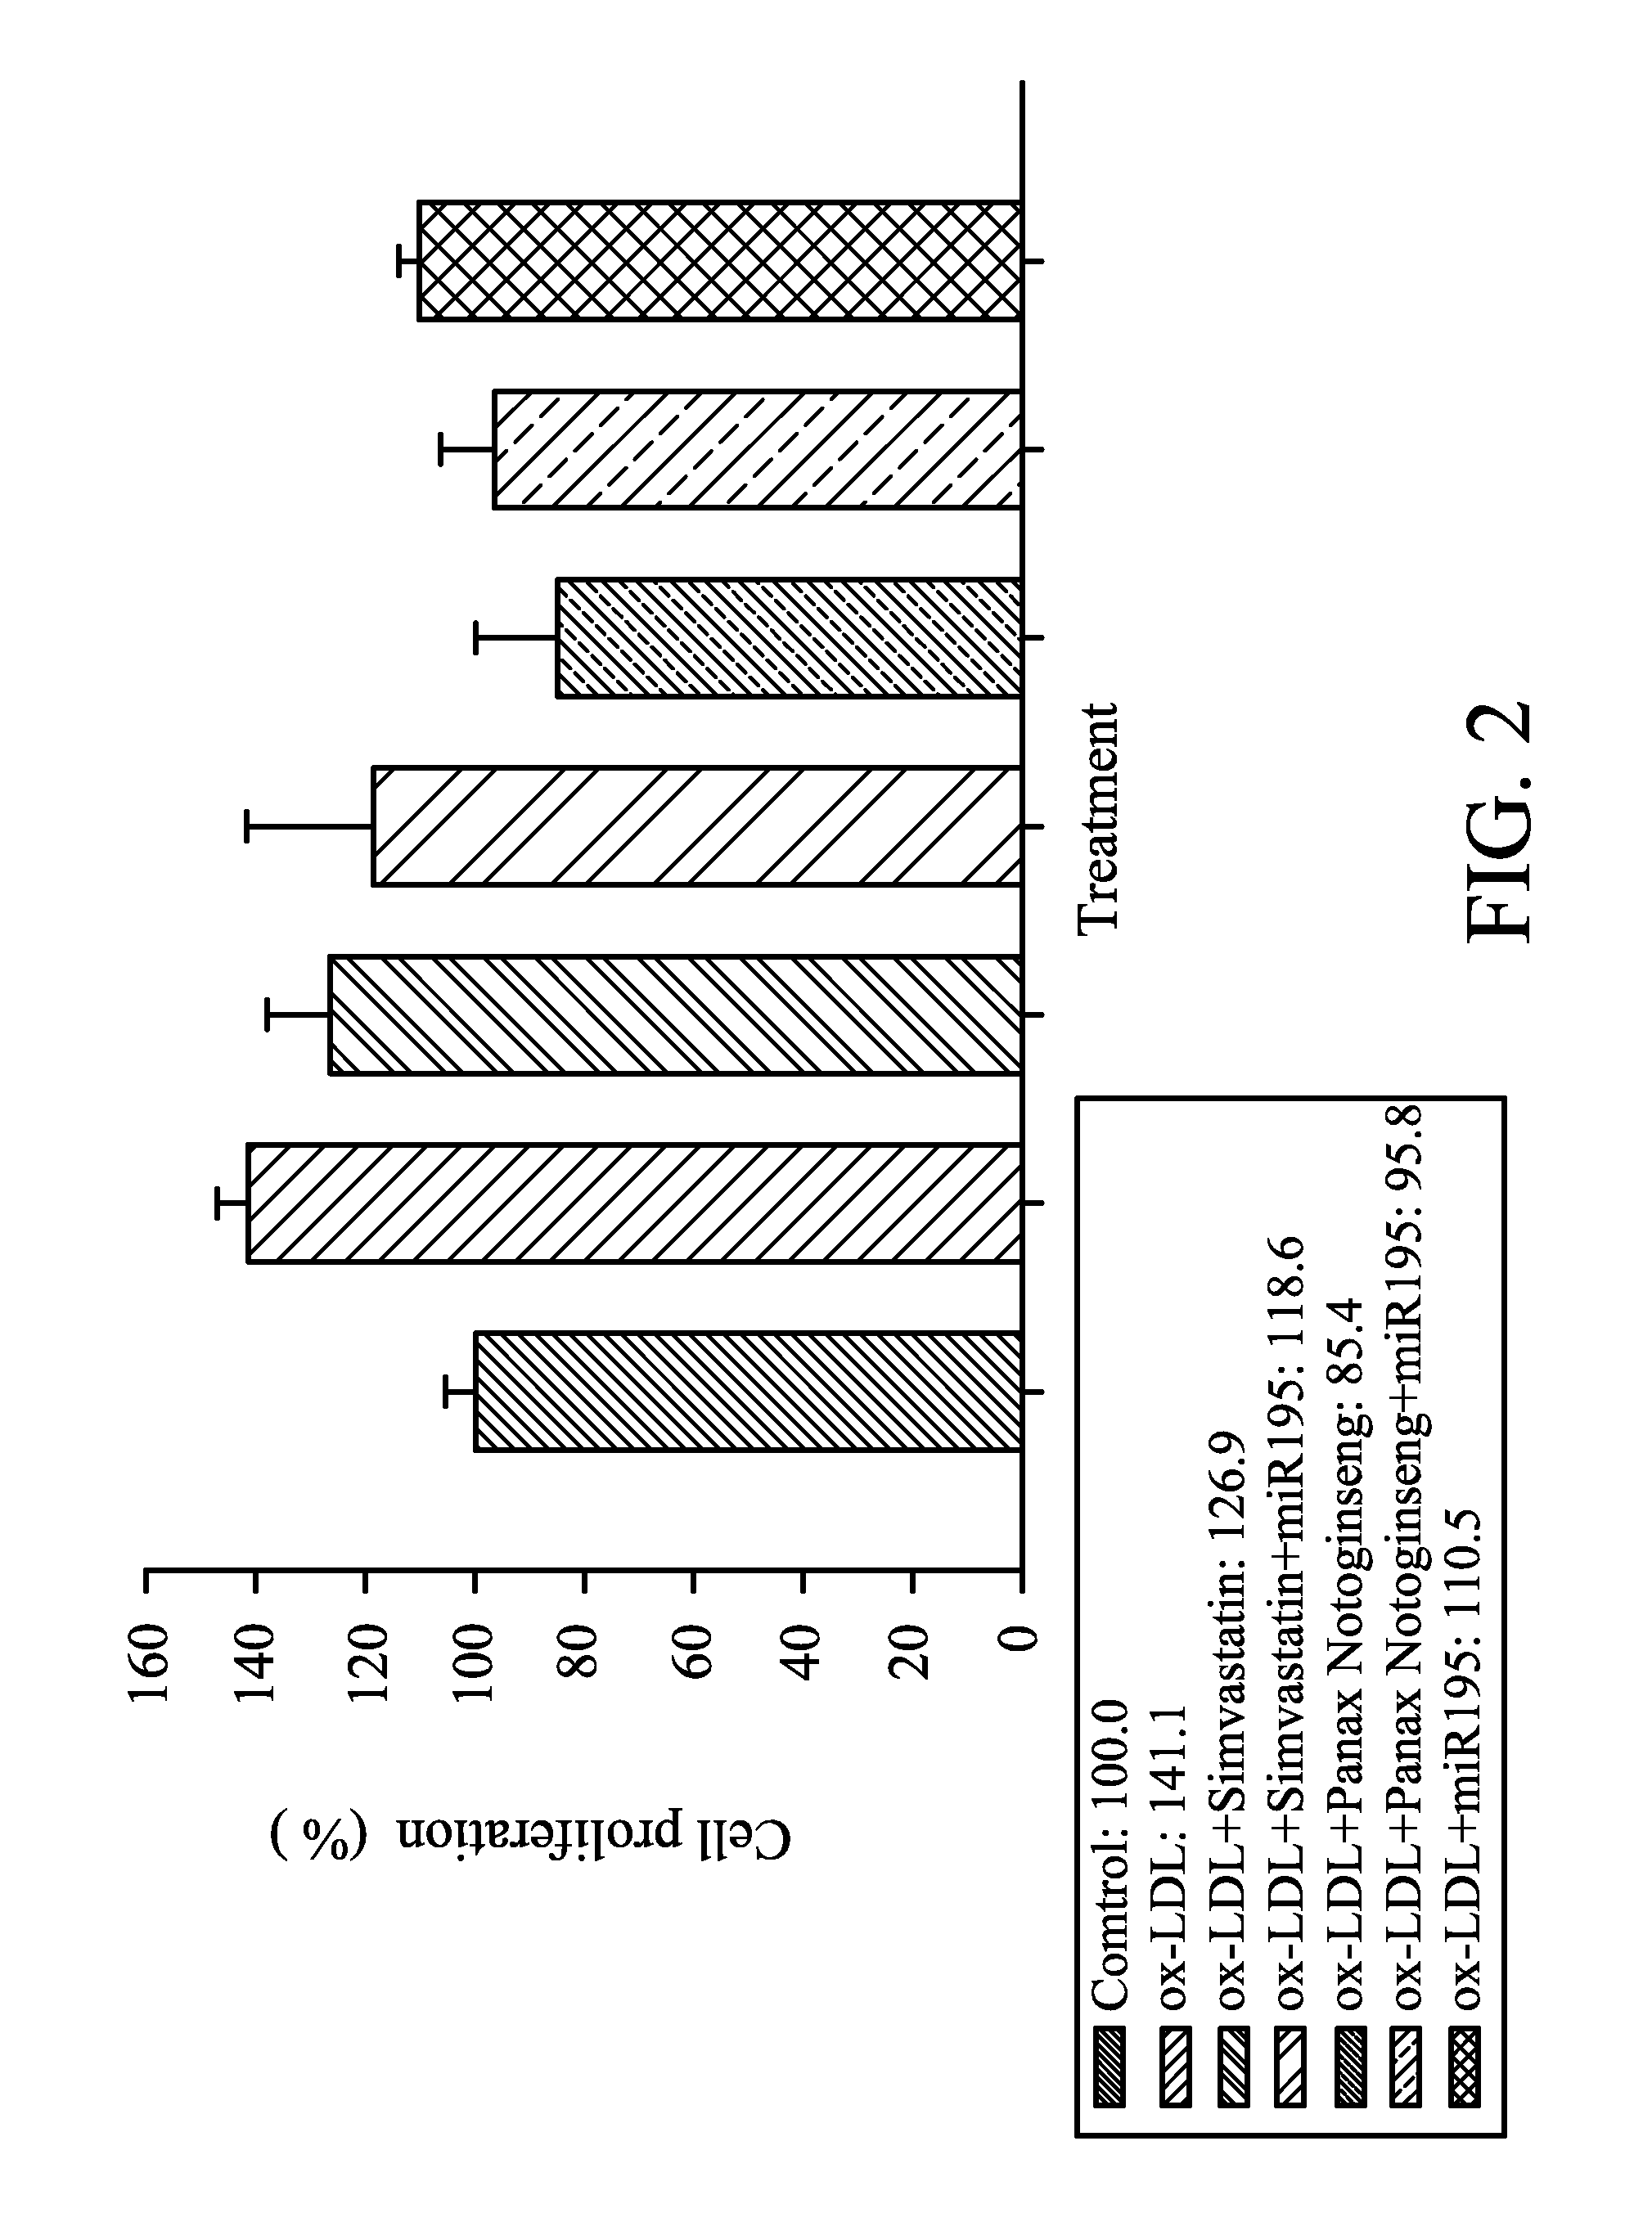 Composition and method for treating atherosclerosis, method for determining if a subject has atherosclerosis and method of screening an Anti-atherosclerotic drug